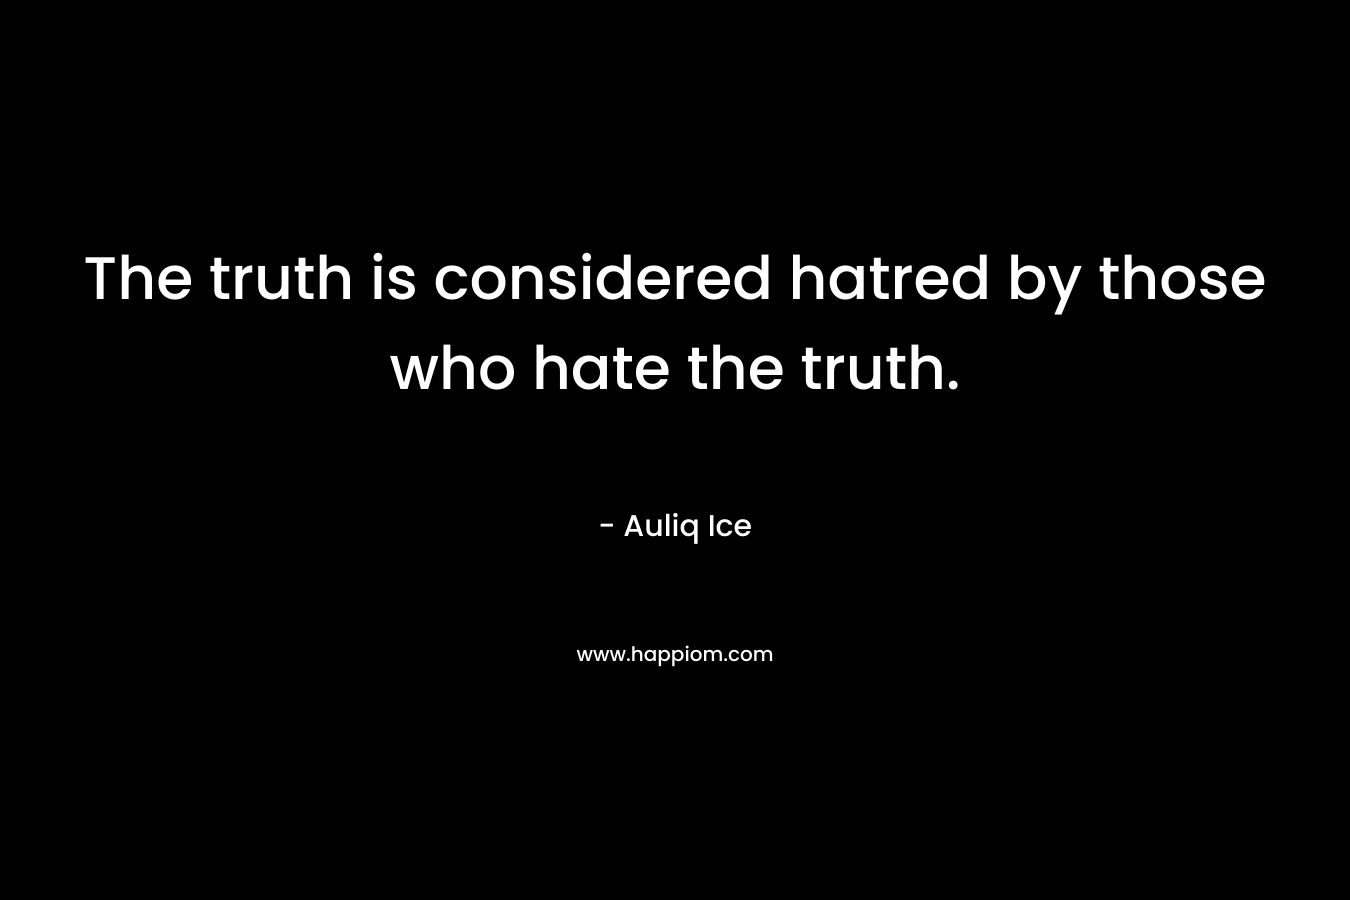 The truth is considered hatred by those who hate the truth. – Auliq Ice